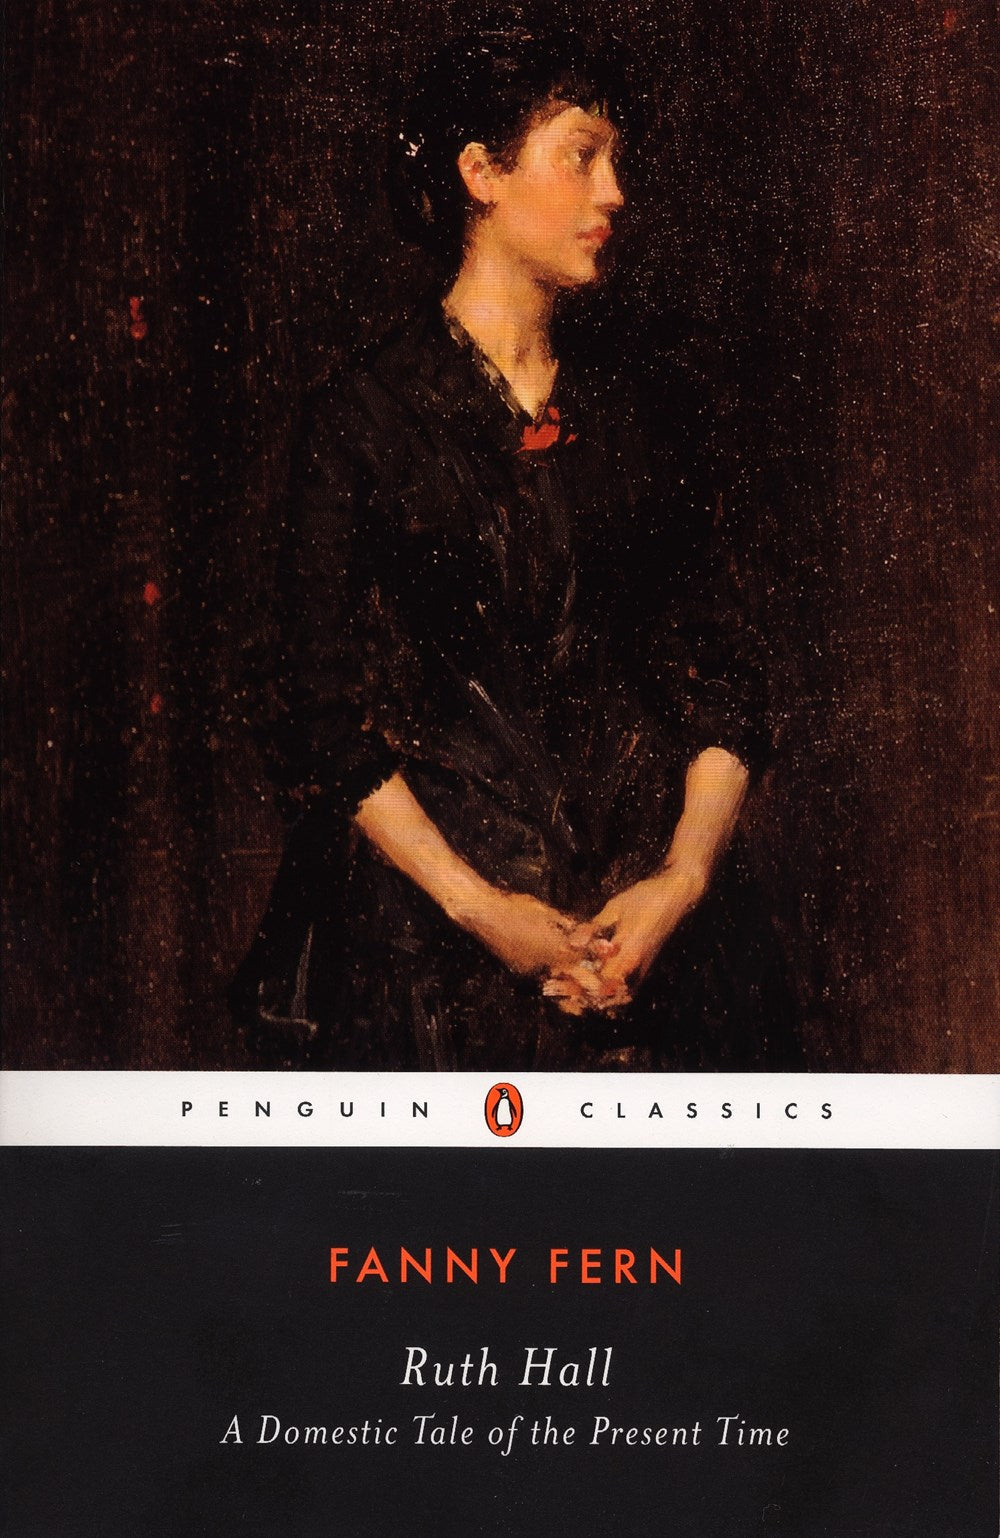 Fanny Fern: A Domestic Tale of the Present Time by Ruth Hall